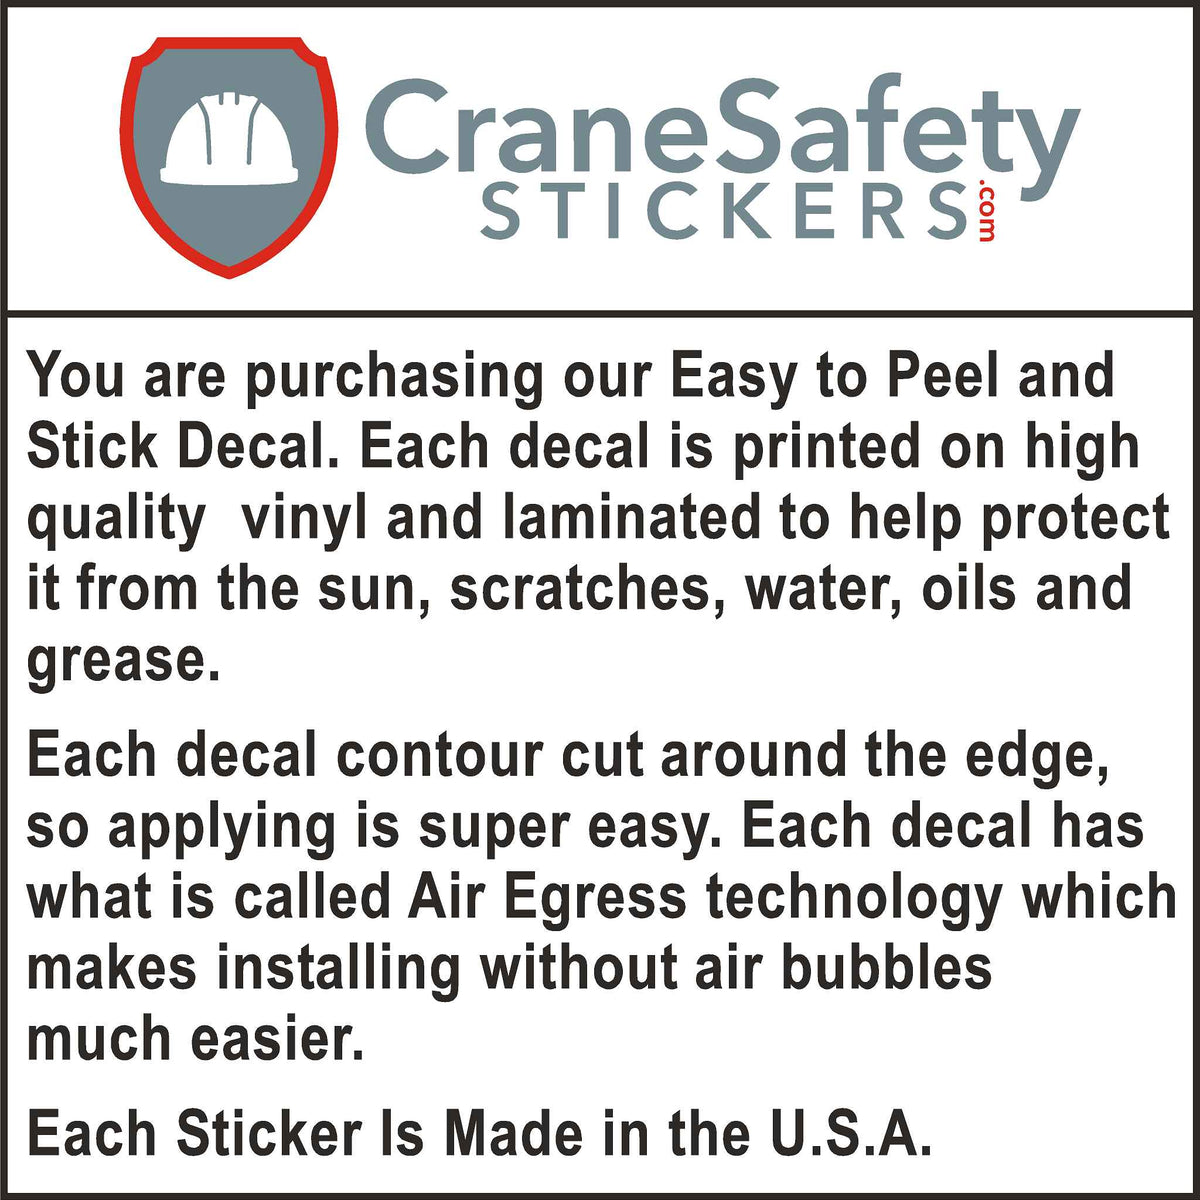 The Quality of our Bilingual Overhead Crane Safety Sticker.